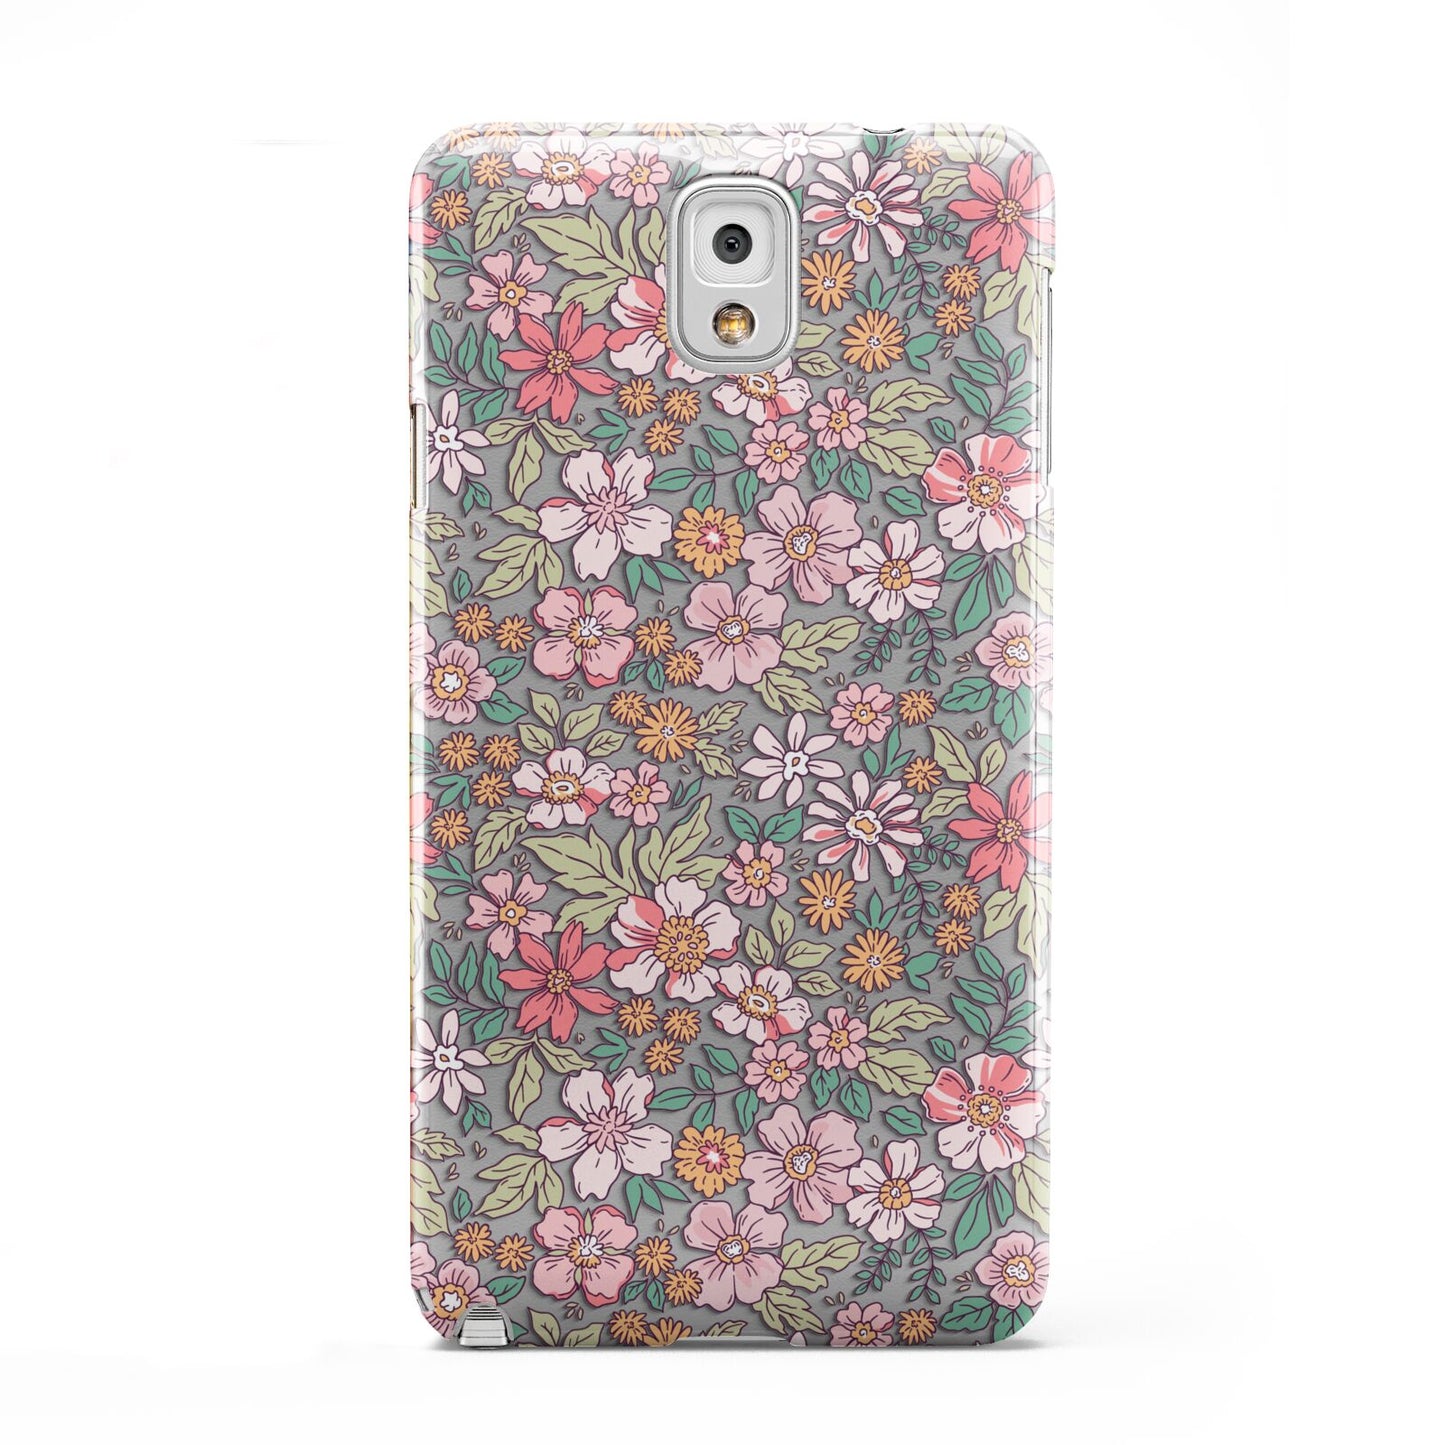 Small Floral Pattern Samsung Galaxy Note 3 Case